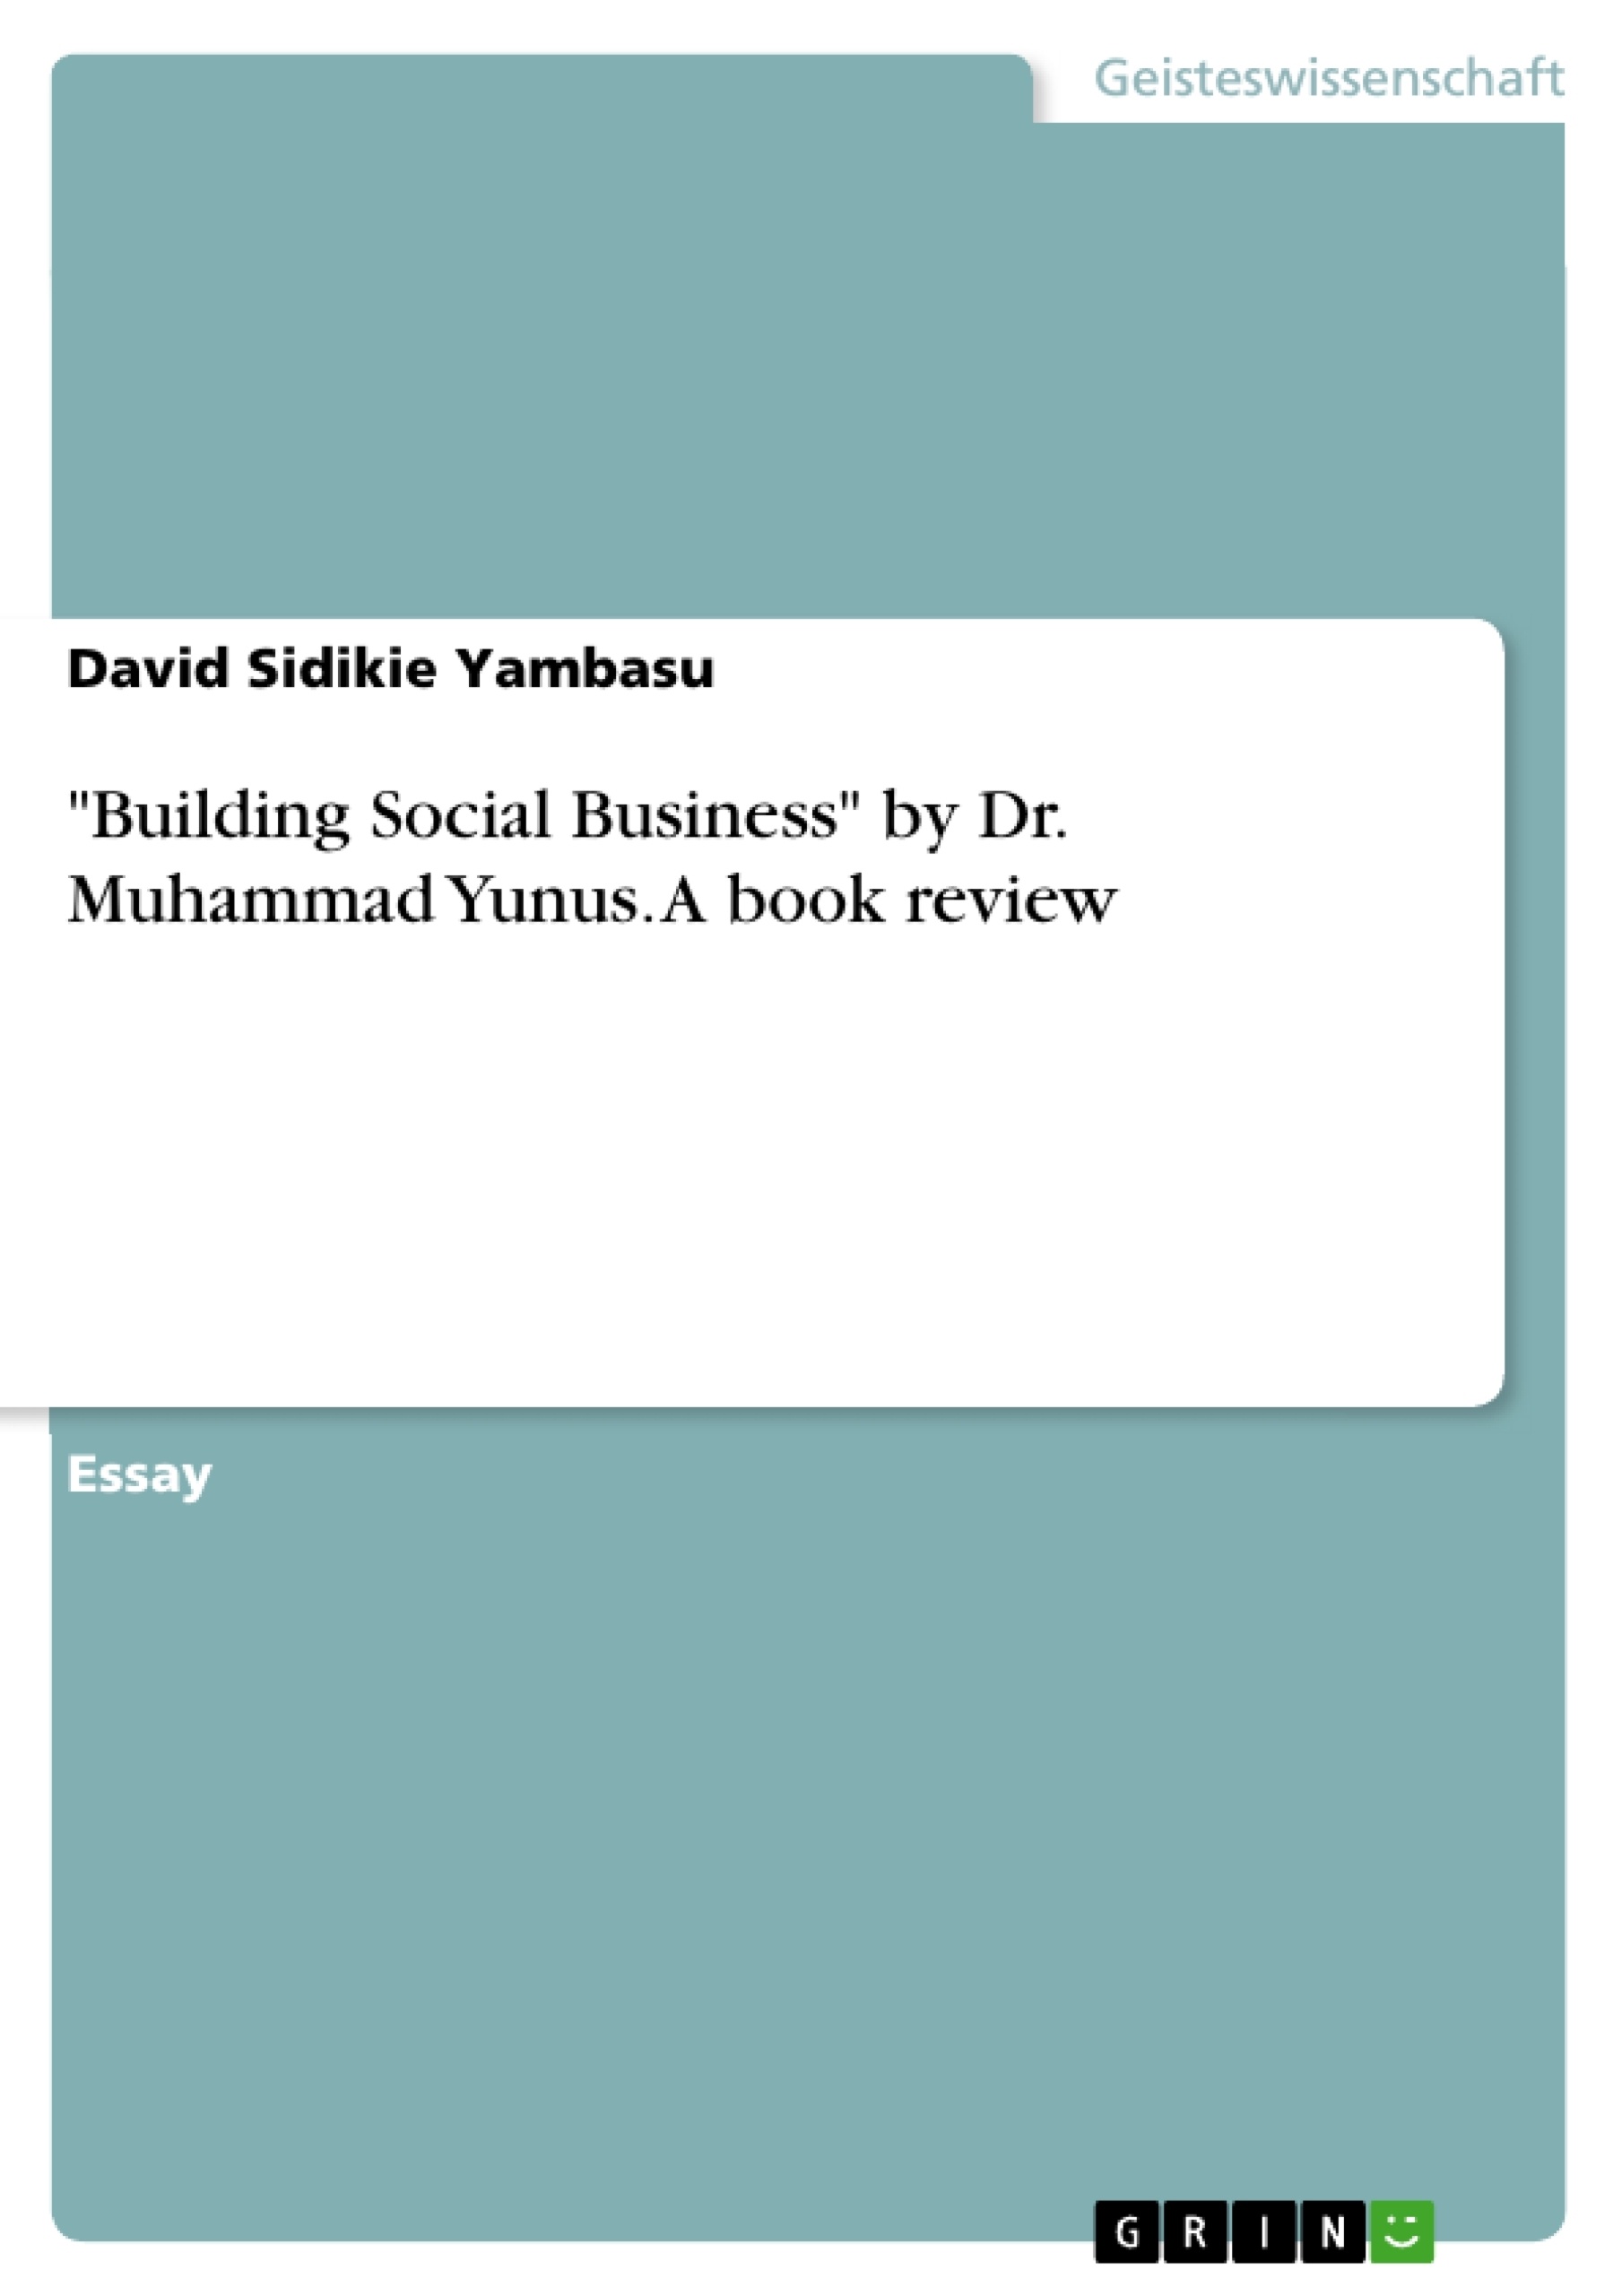 Titel: "Building Social Business" by Dr. Muhammad Yunus. A book review